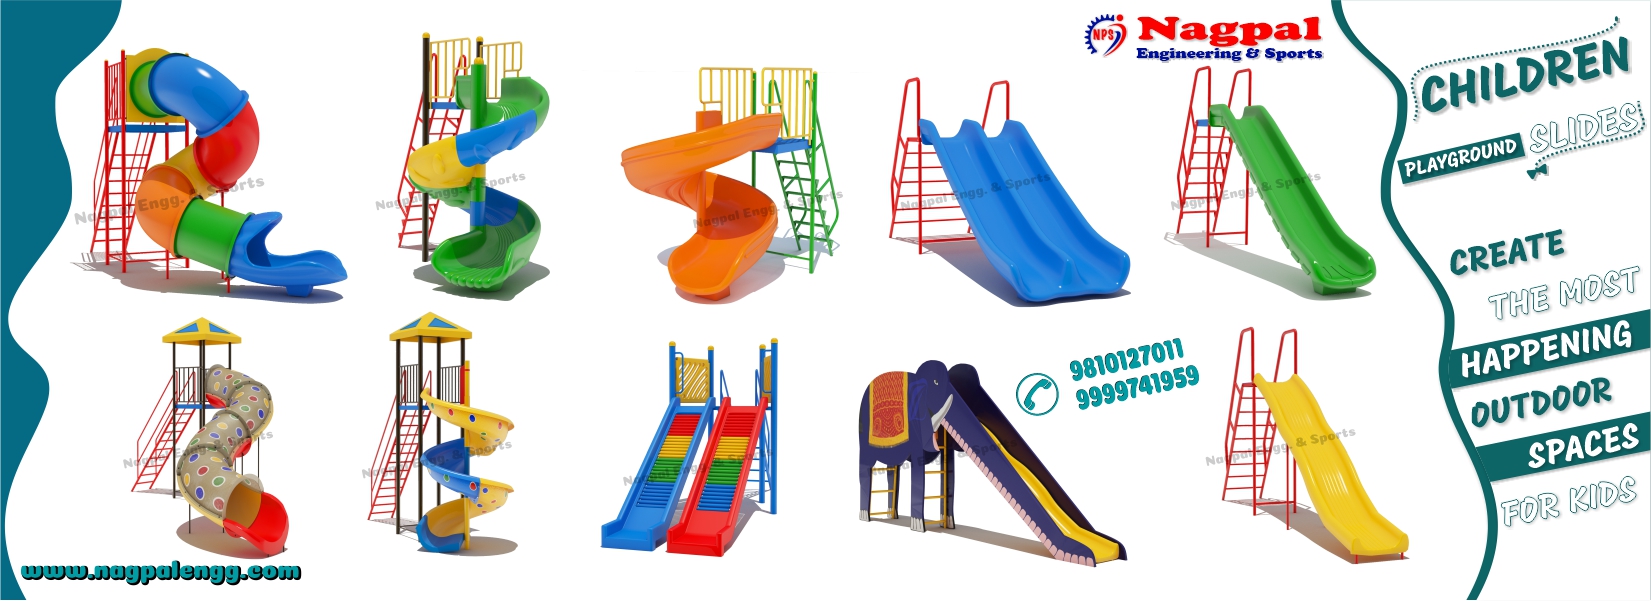 Playground Equipment Manufacturers, Exporters & Suppliers in India